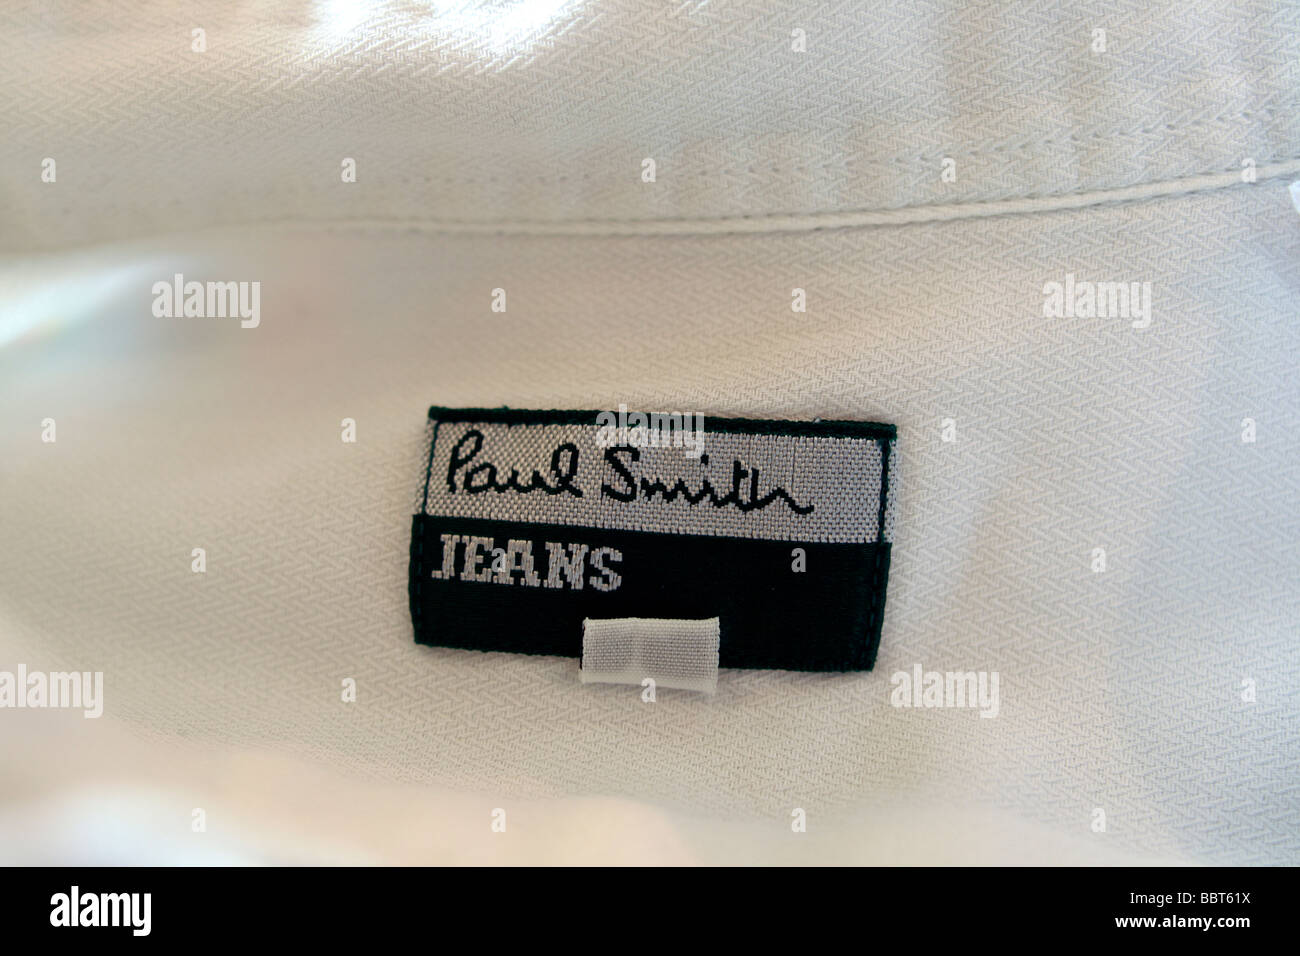 the Paul Smith Jeans label on a shirt Stock Photo - Alamy